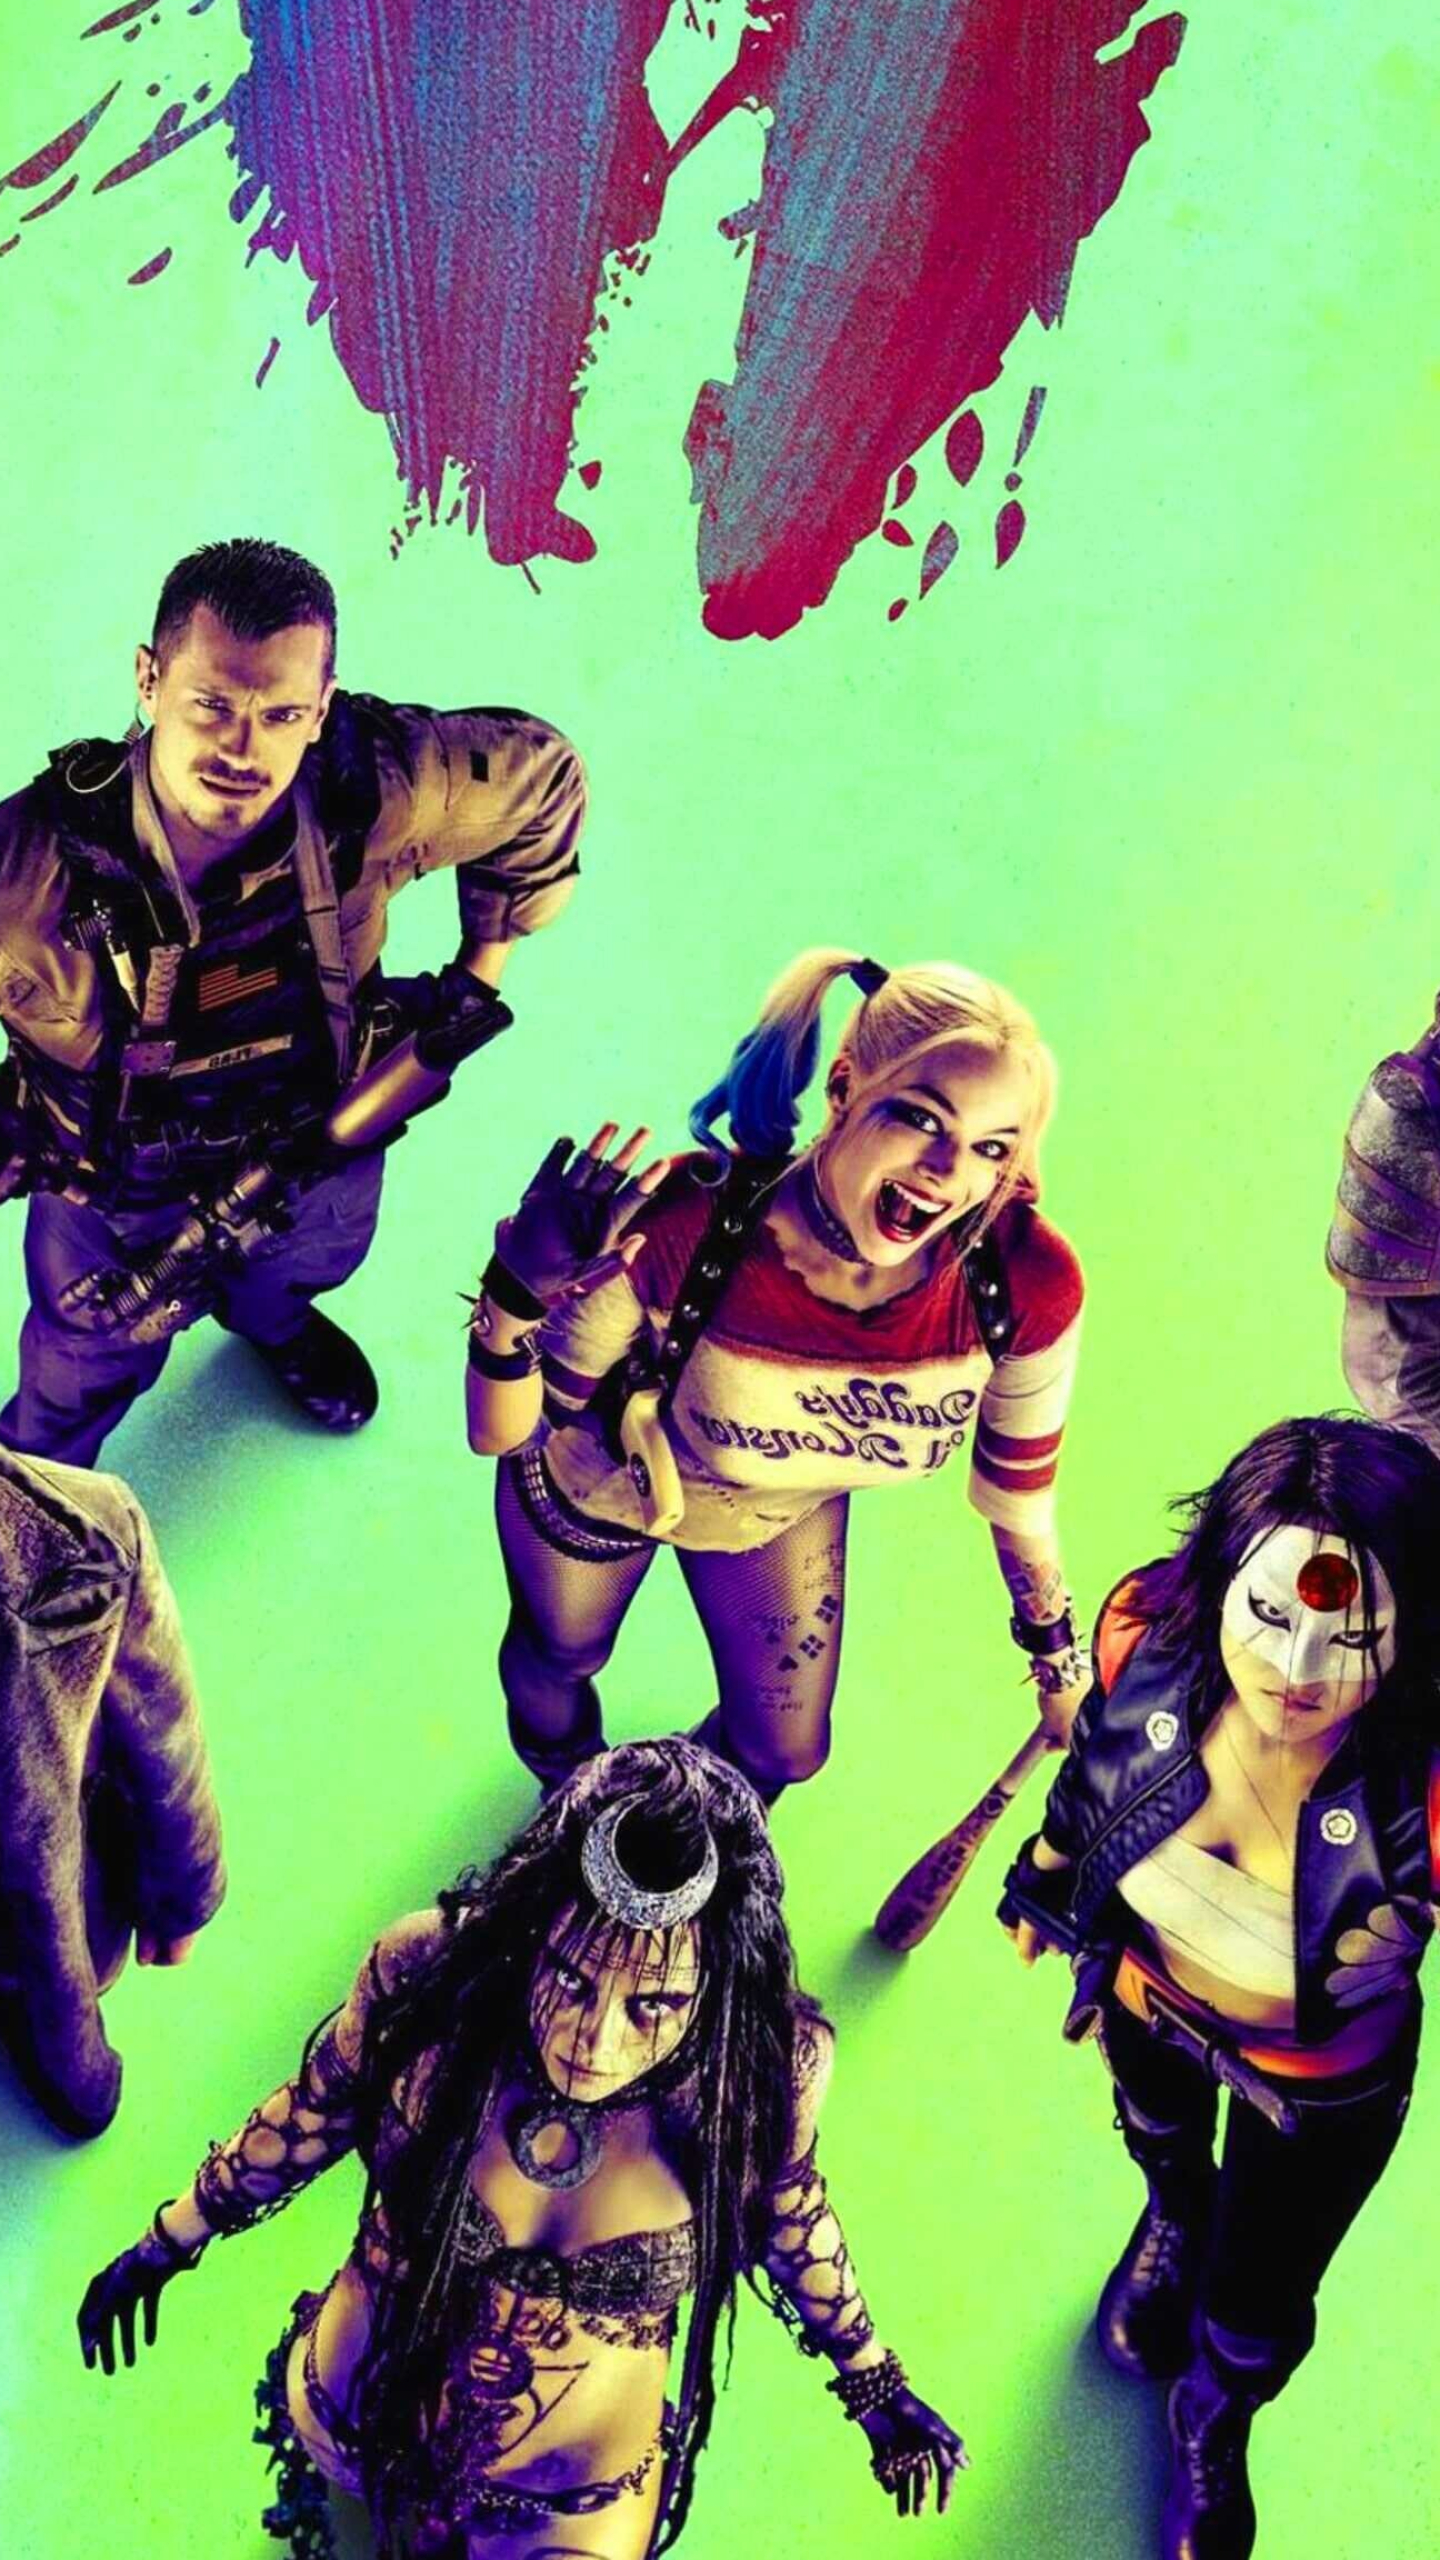 Suicide Squad: The recurring members include Enchantress, Katana, Killer Croc, Captain Boomerang, Deadshot, and Harley Quinn. 1440x2560 HD Background.